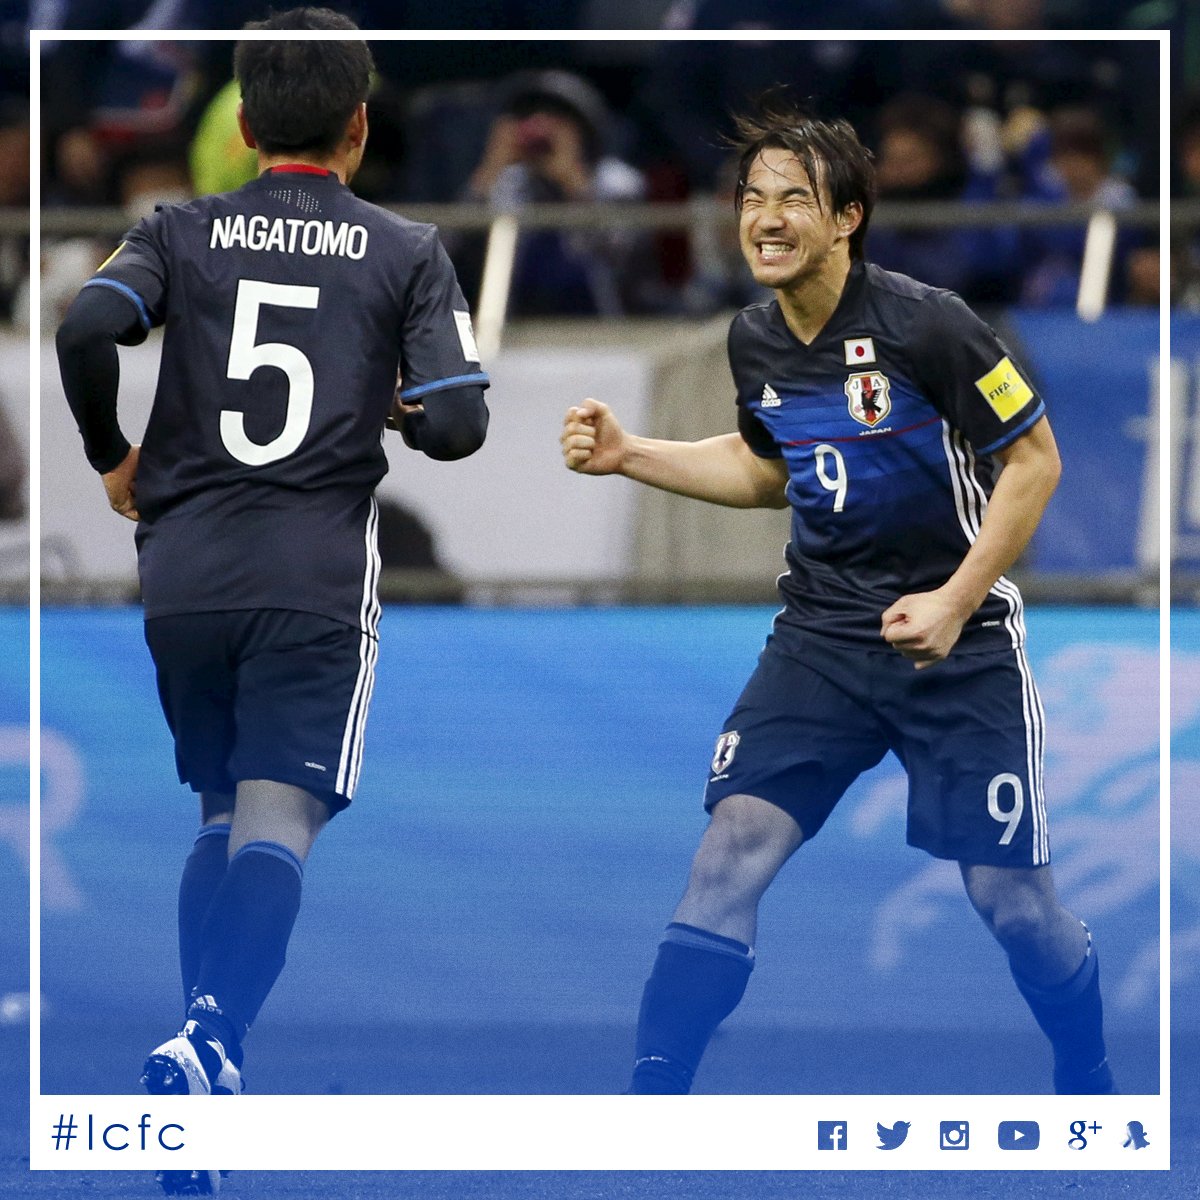 Leicester City Internationals A Goal On His 99th Japan Appearance For Shinji Okazaki Full Round Up T Co Bwrljmvgky T Co Qt25ah6ykv Twitter